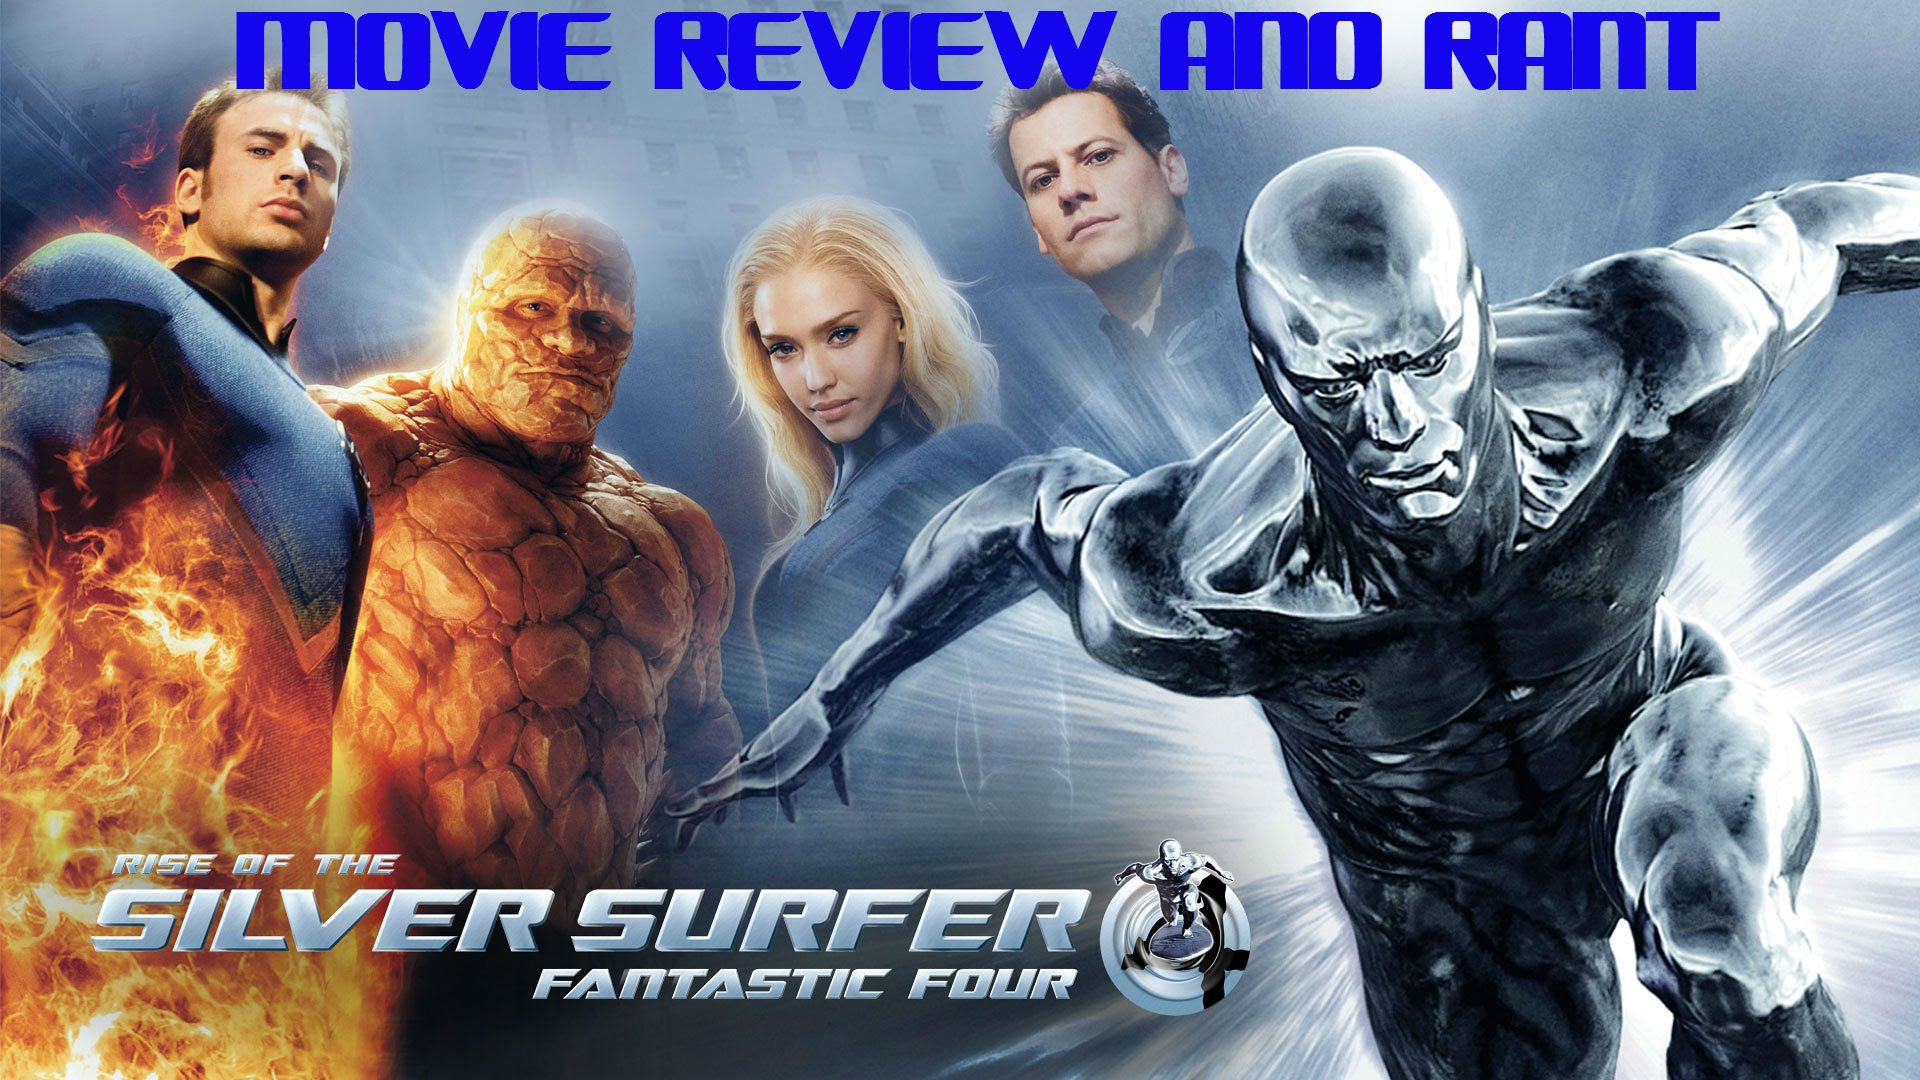 Fantastic 4: Rise Of The Silver Surfer Backgrounds, Compatible - PC, Mobile, Gadgets| 1920x1080 px